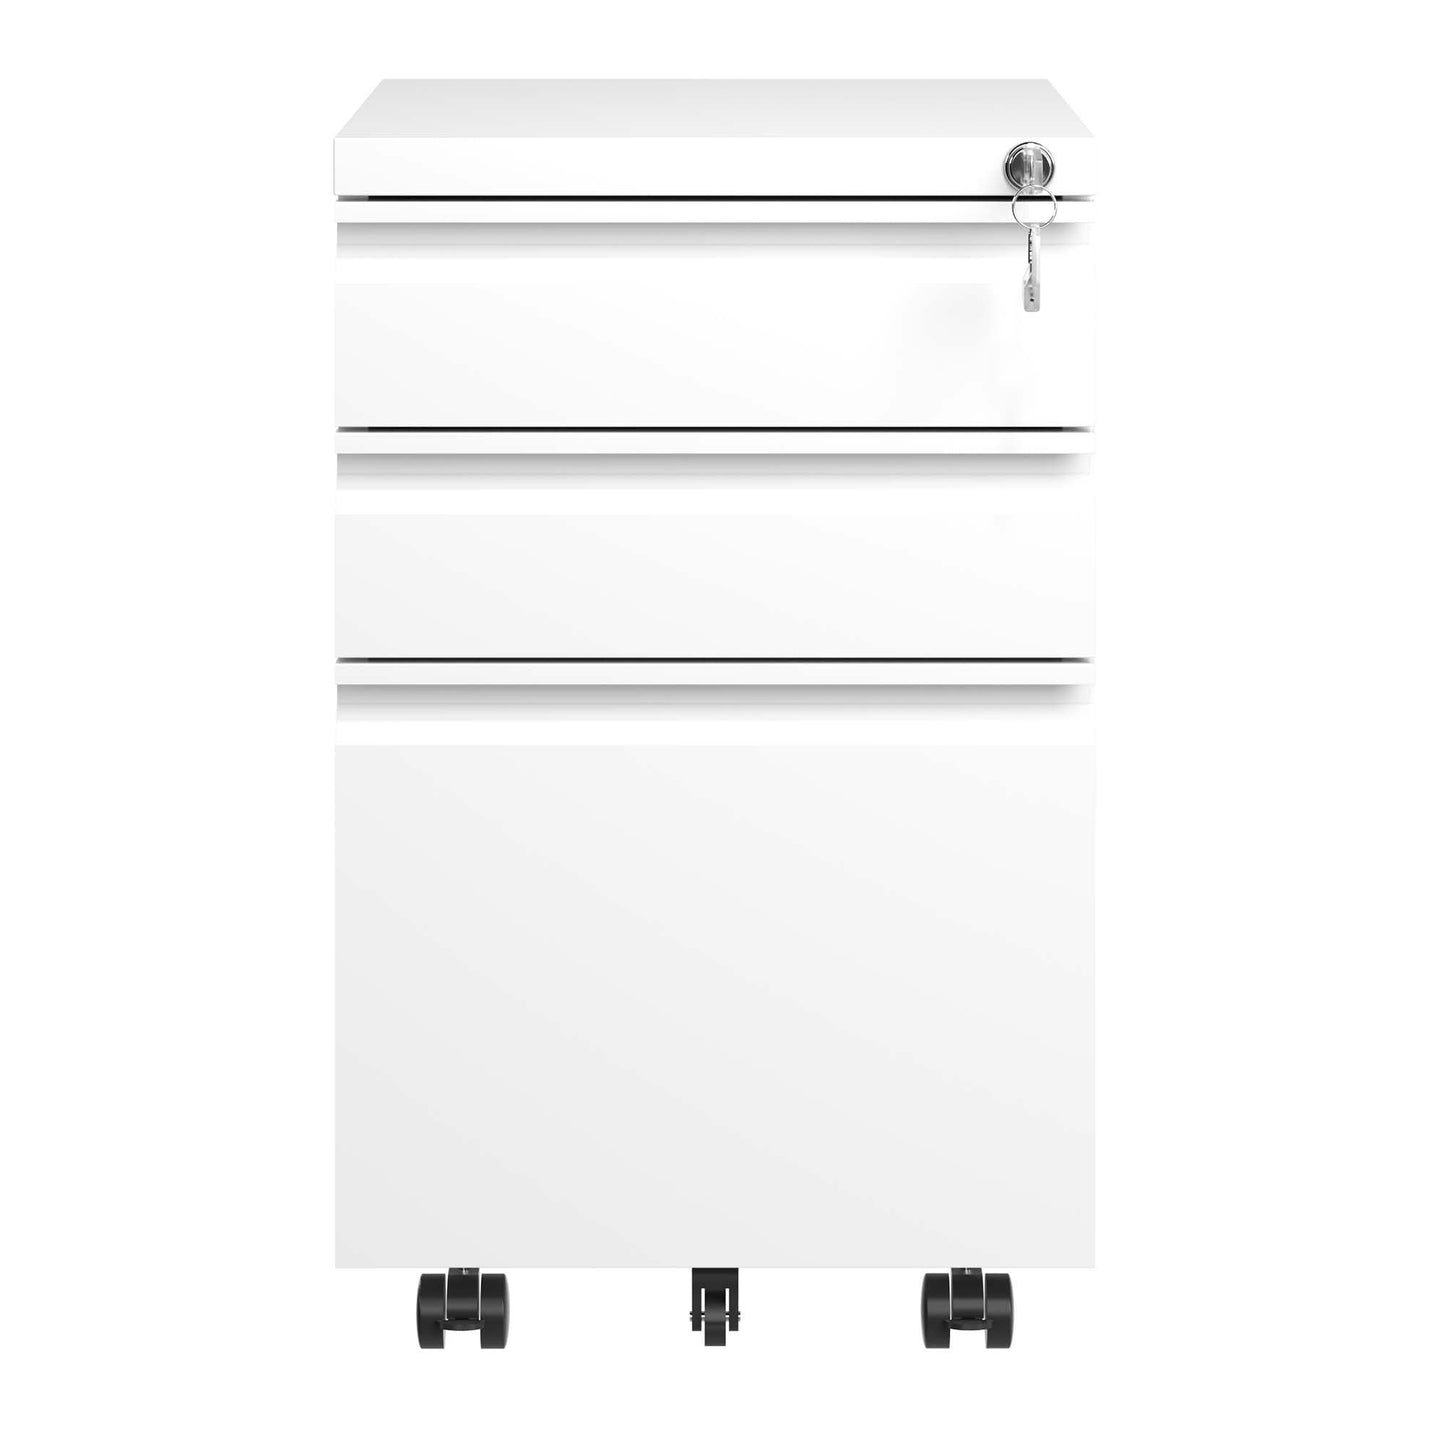 3 Drawer Mobile File Cabinet with Lock,Metal Filing Cabinets for Home Office Organizer Letters/Legal/A4,Fully Assembled,White